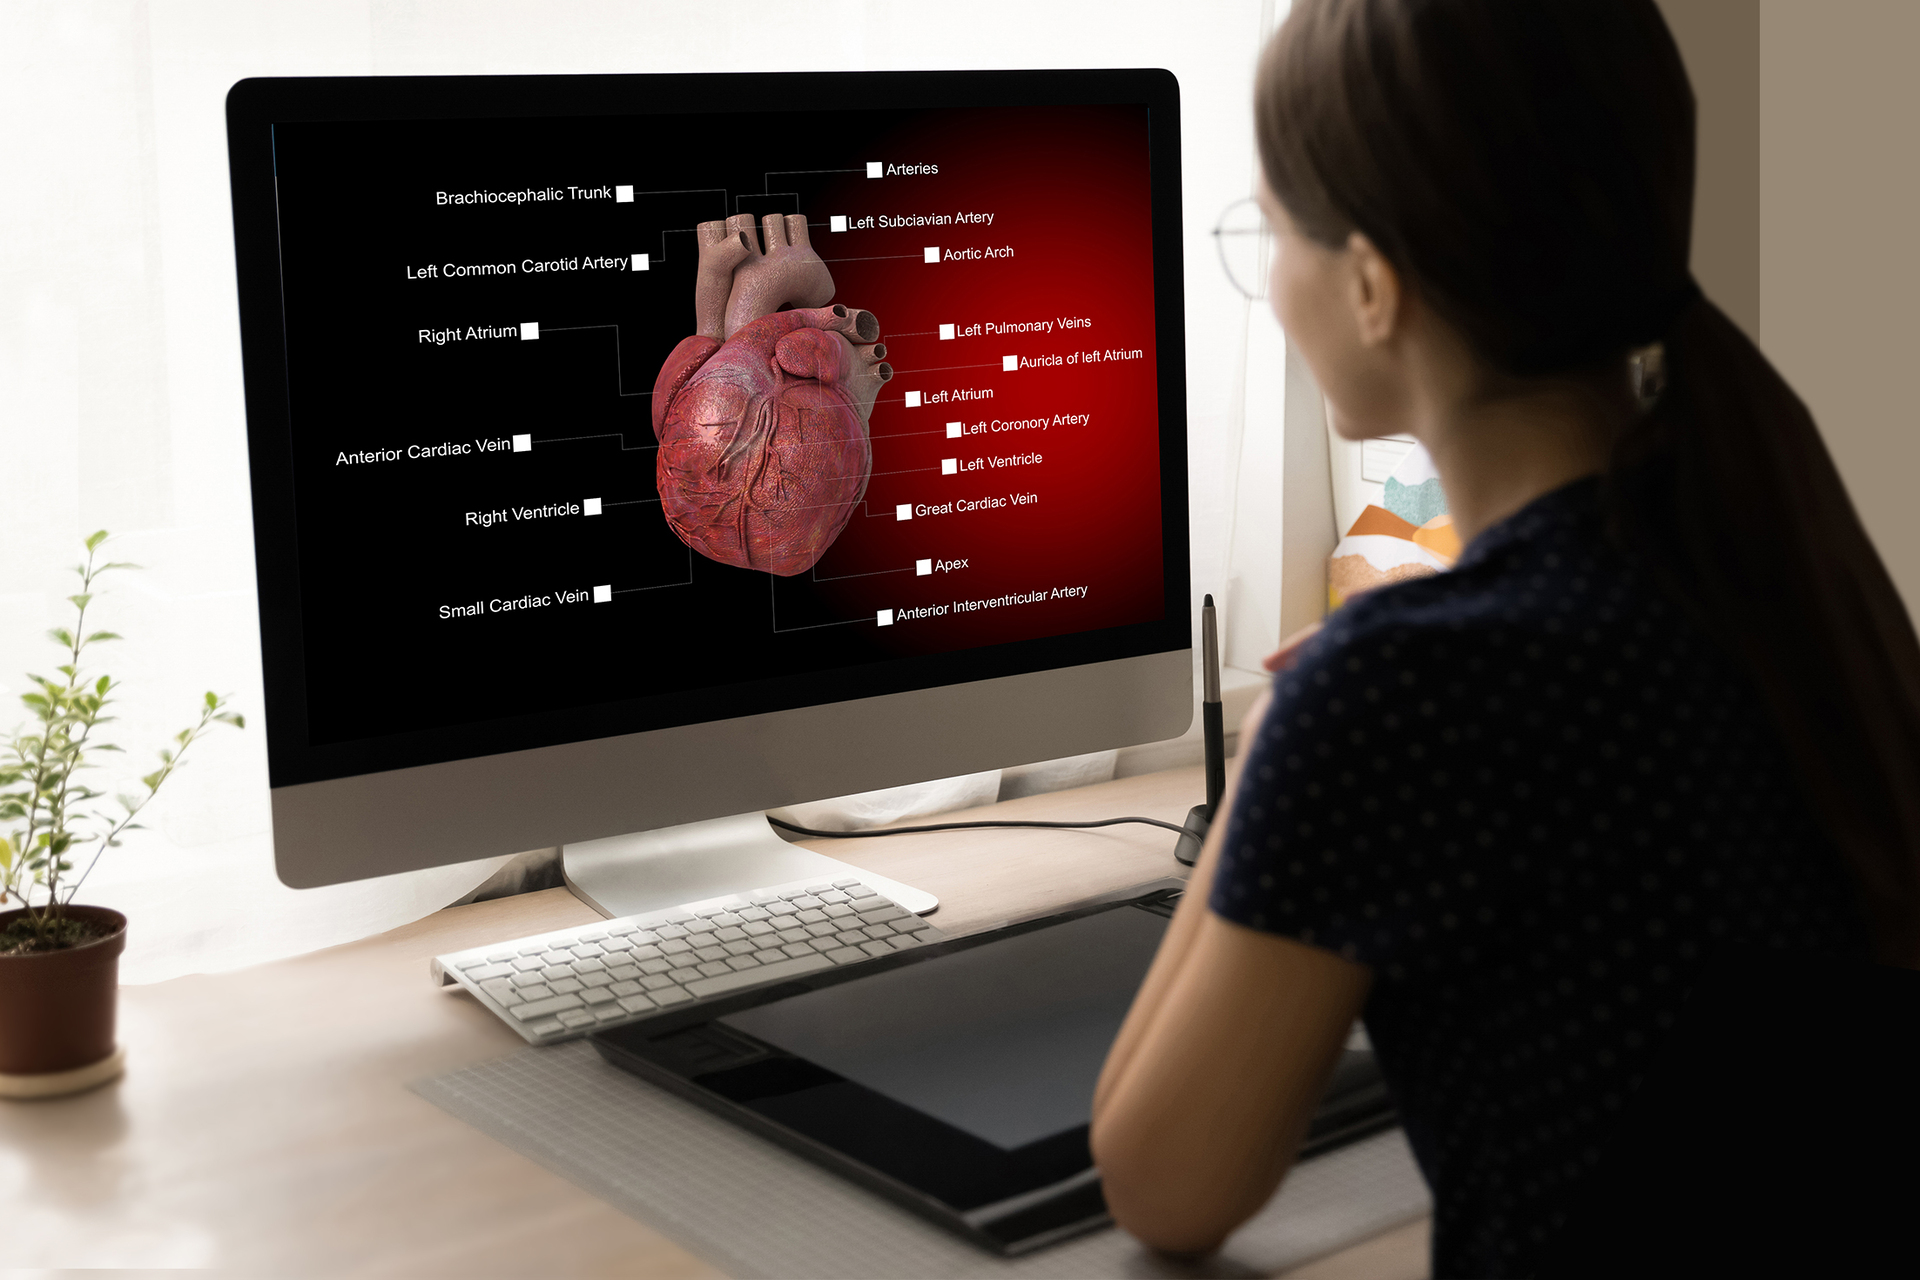 Woman reading image of heart on computer screen